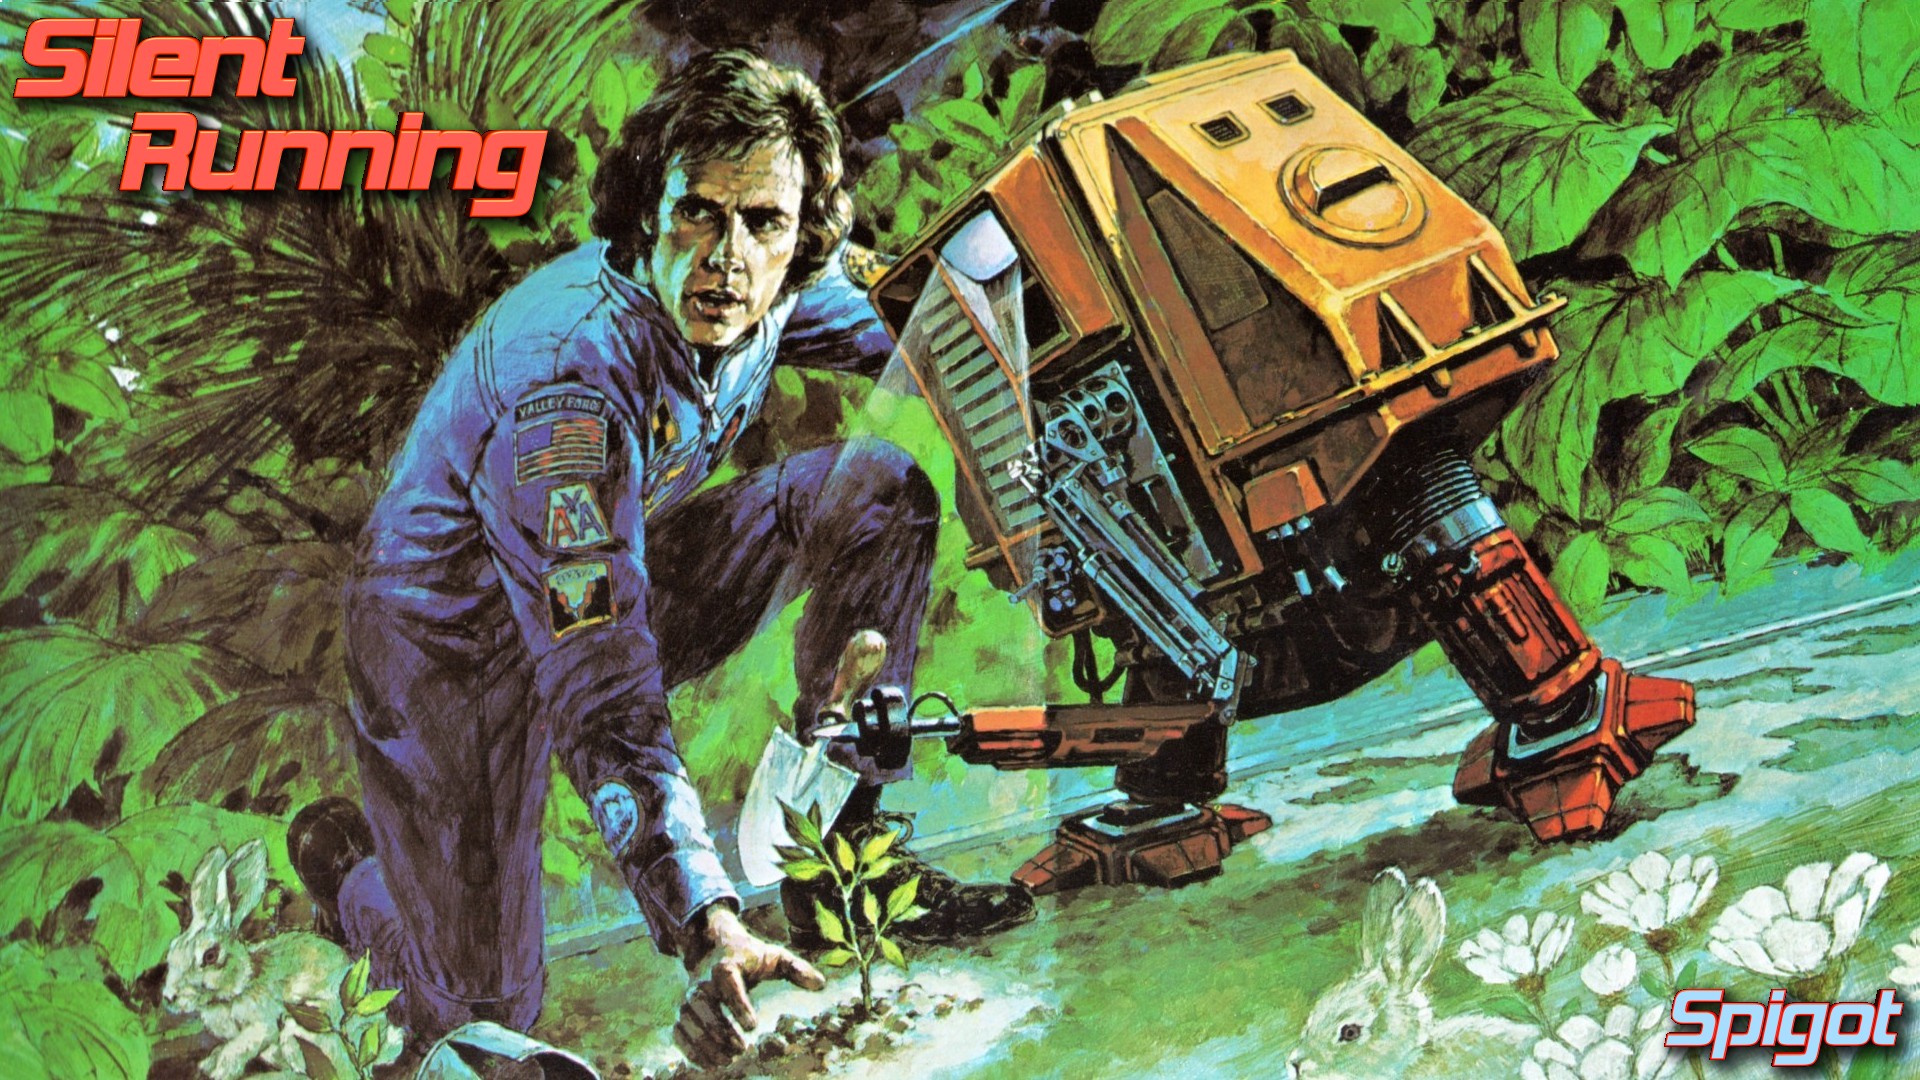 HQ Silent Running Wallpapers | File 674.97Kb